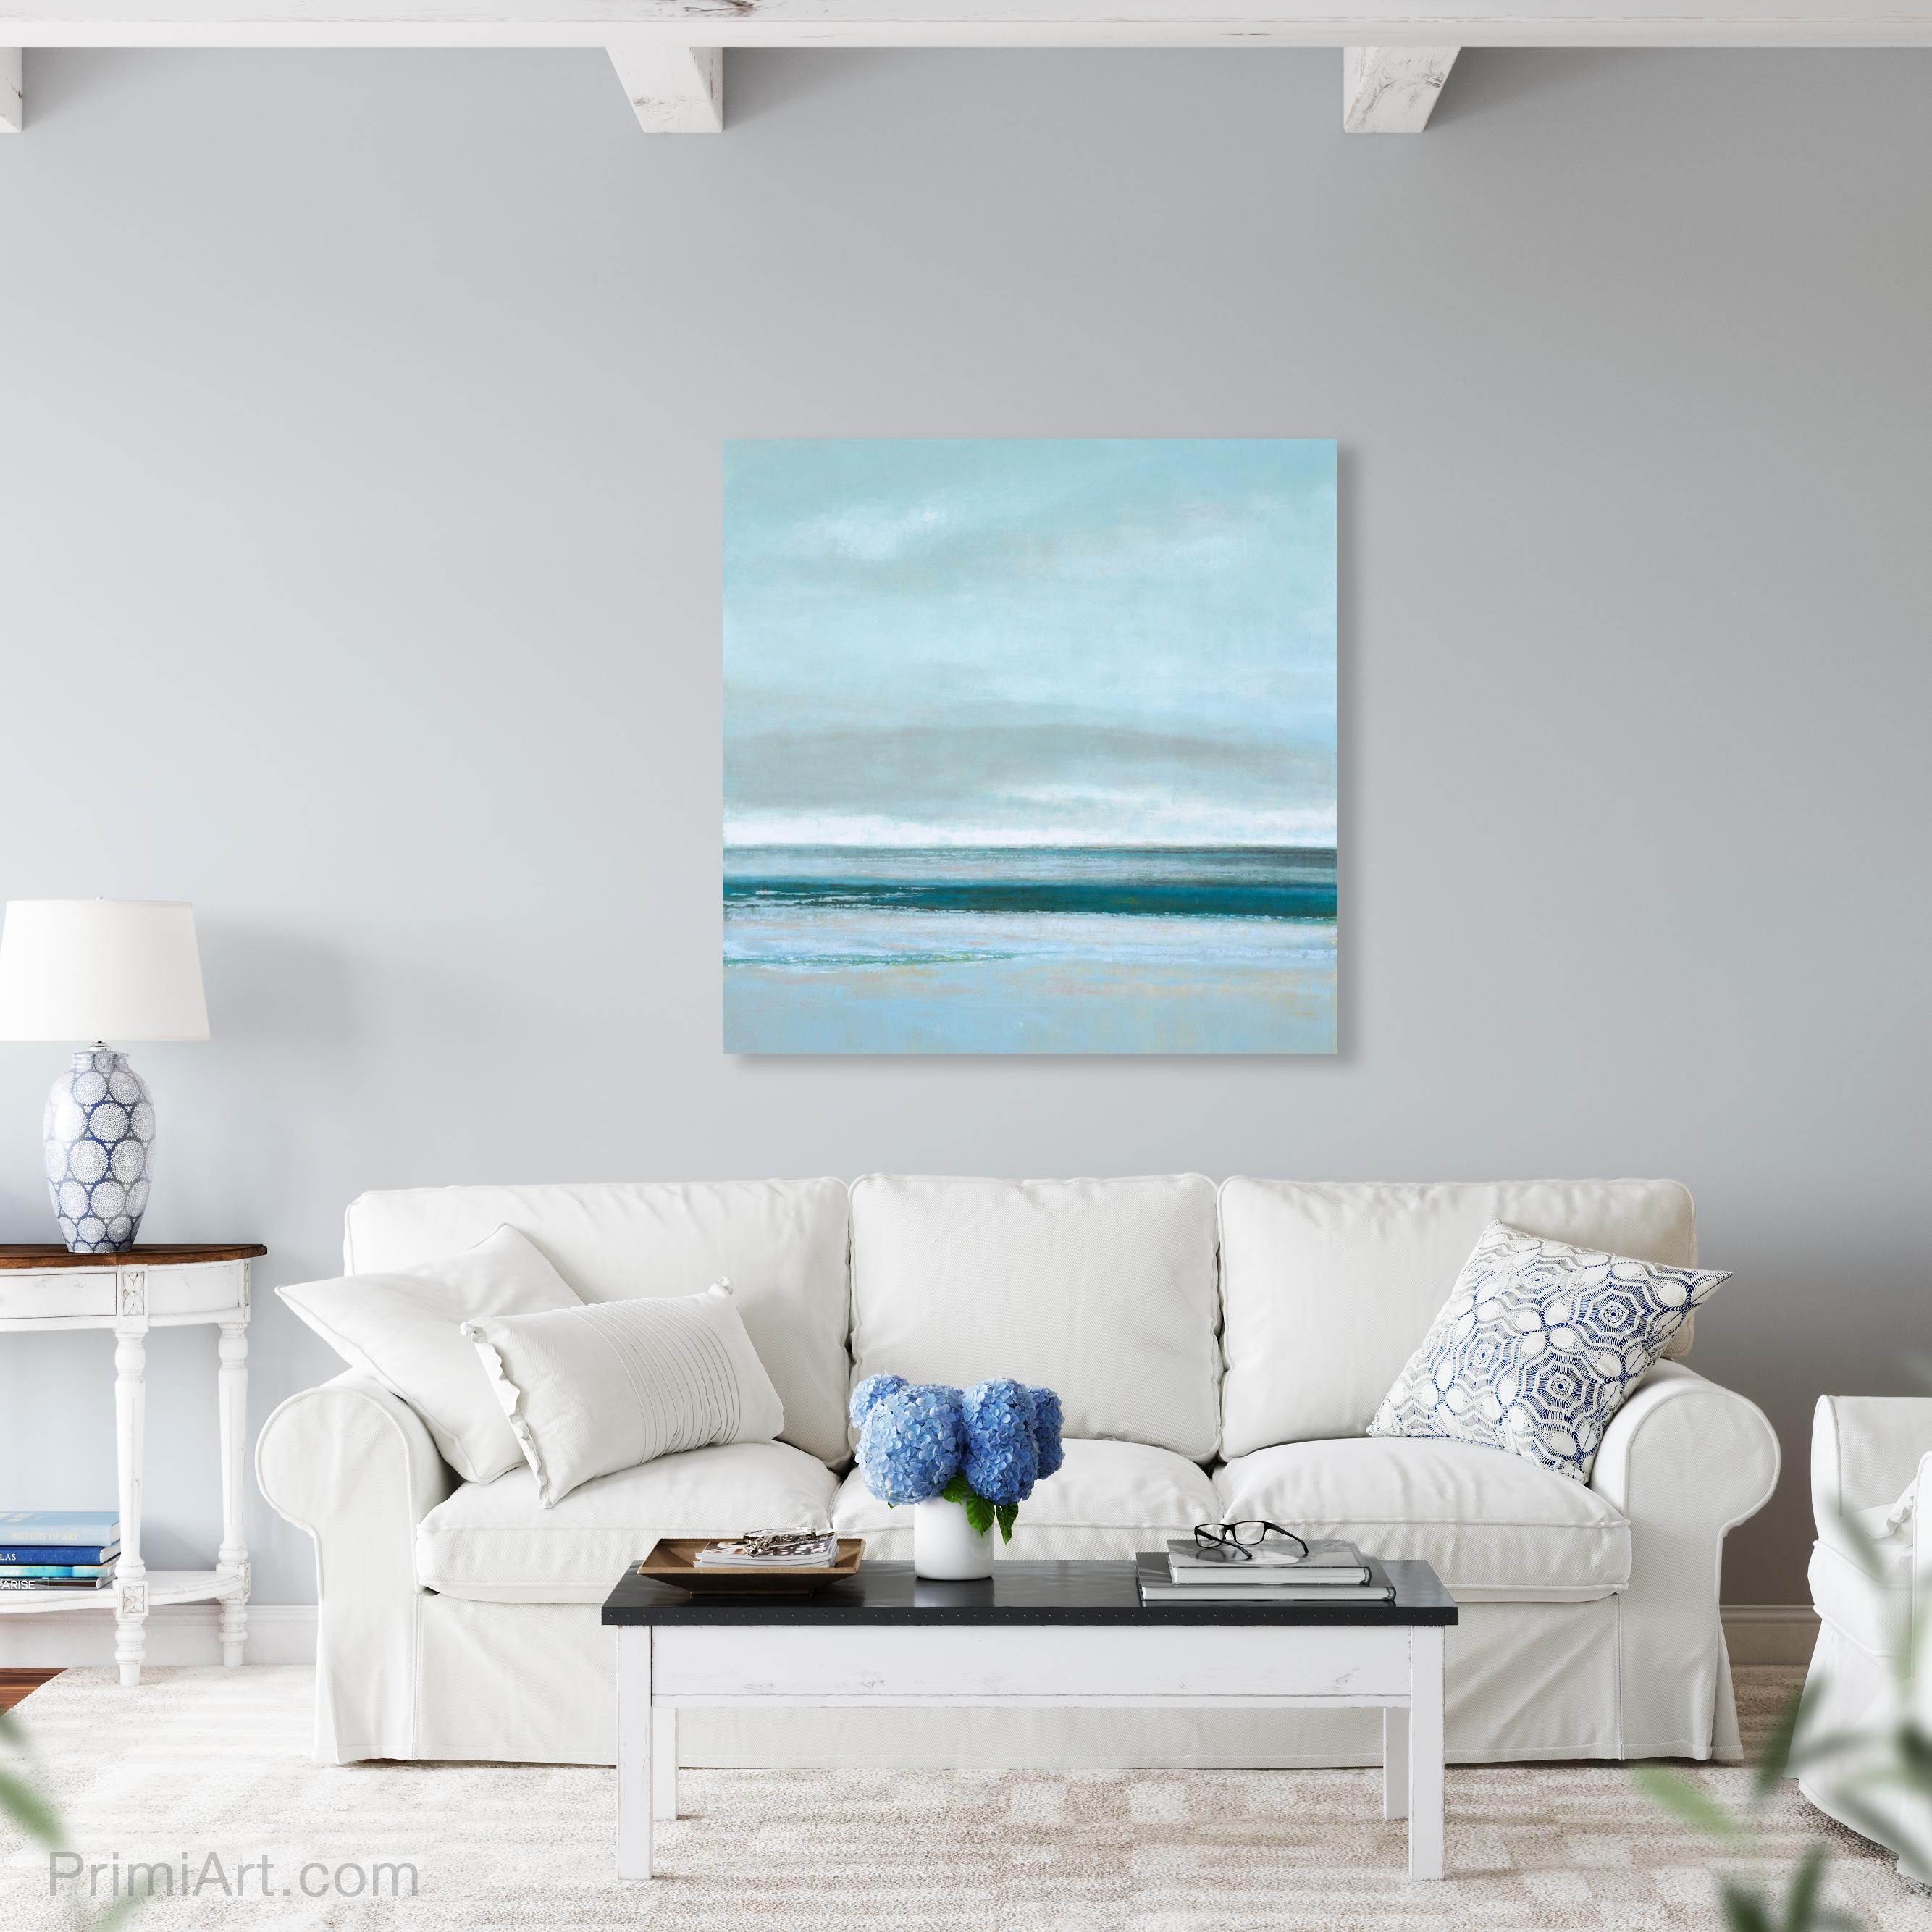 Cloudy Bay
36.0 x 36.0 x 1.5, 10.0 lbs 
Oil Paint
Hand signed by artist 

Description:
An original oil painting by Victoria Primicias. Influcened by the syle of the Impressionists, this calming landscape depicts the ocean.

Artist's Commentary: